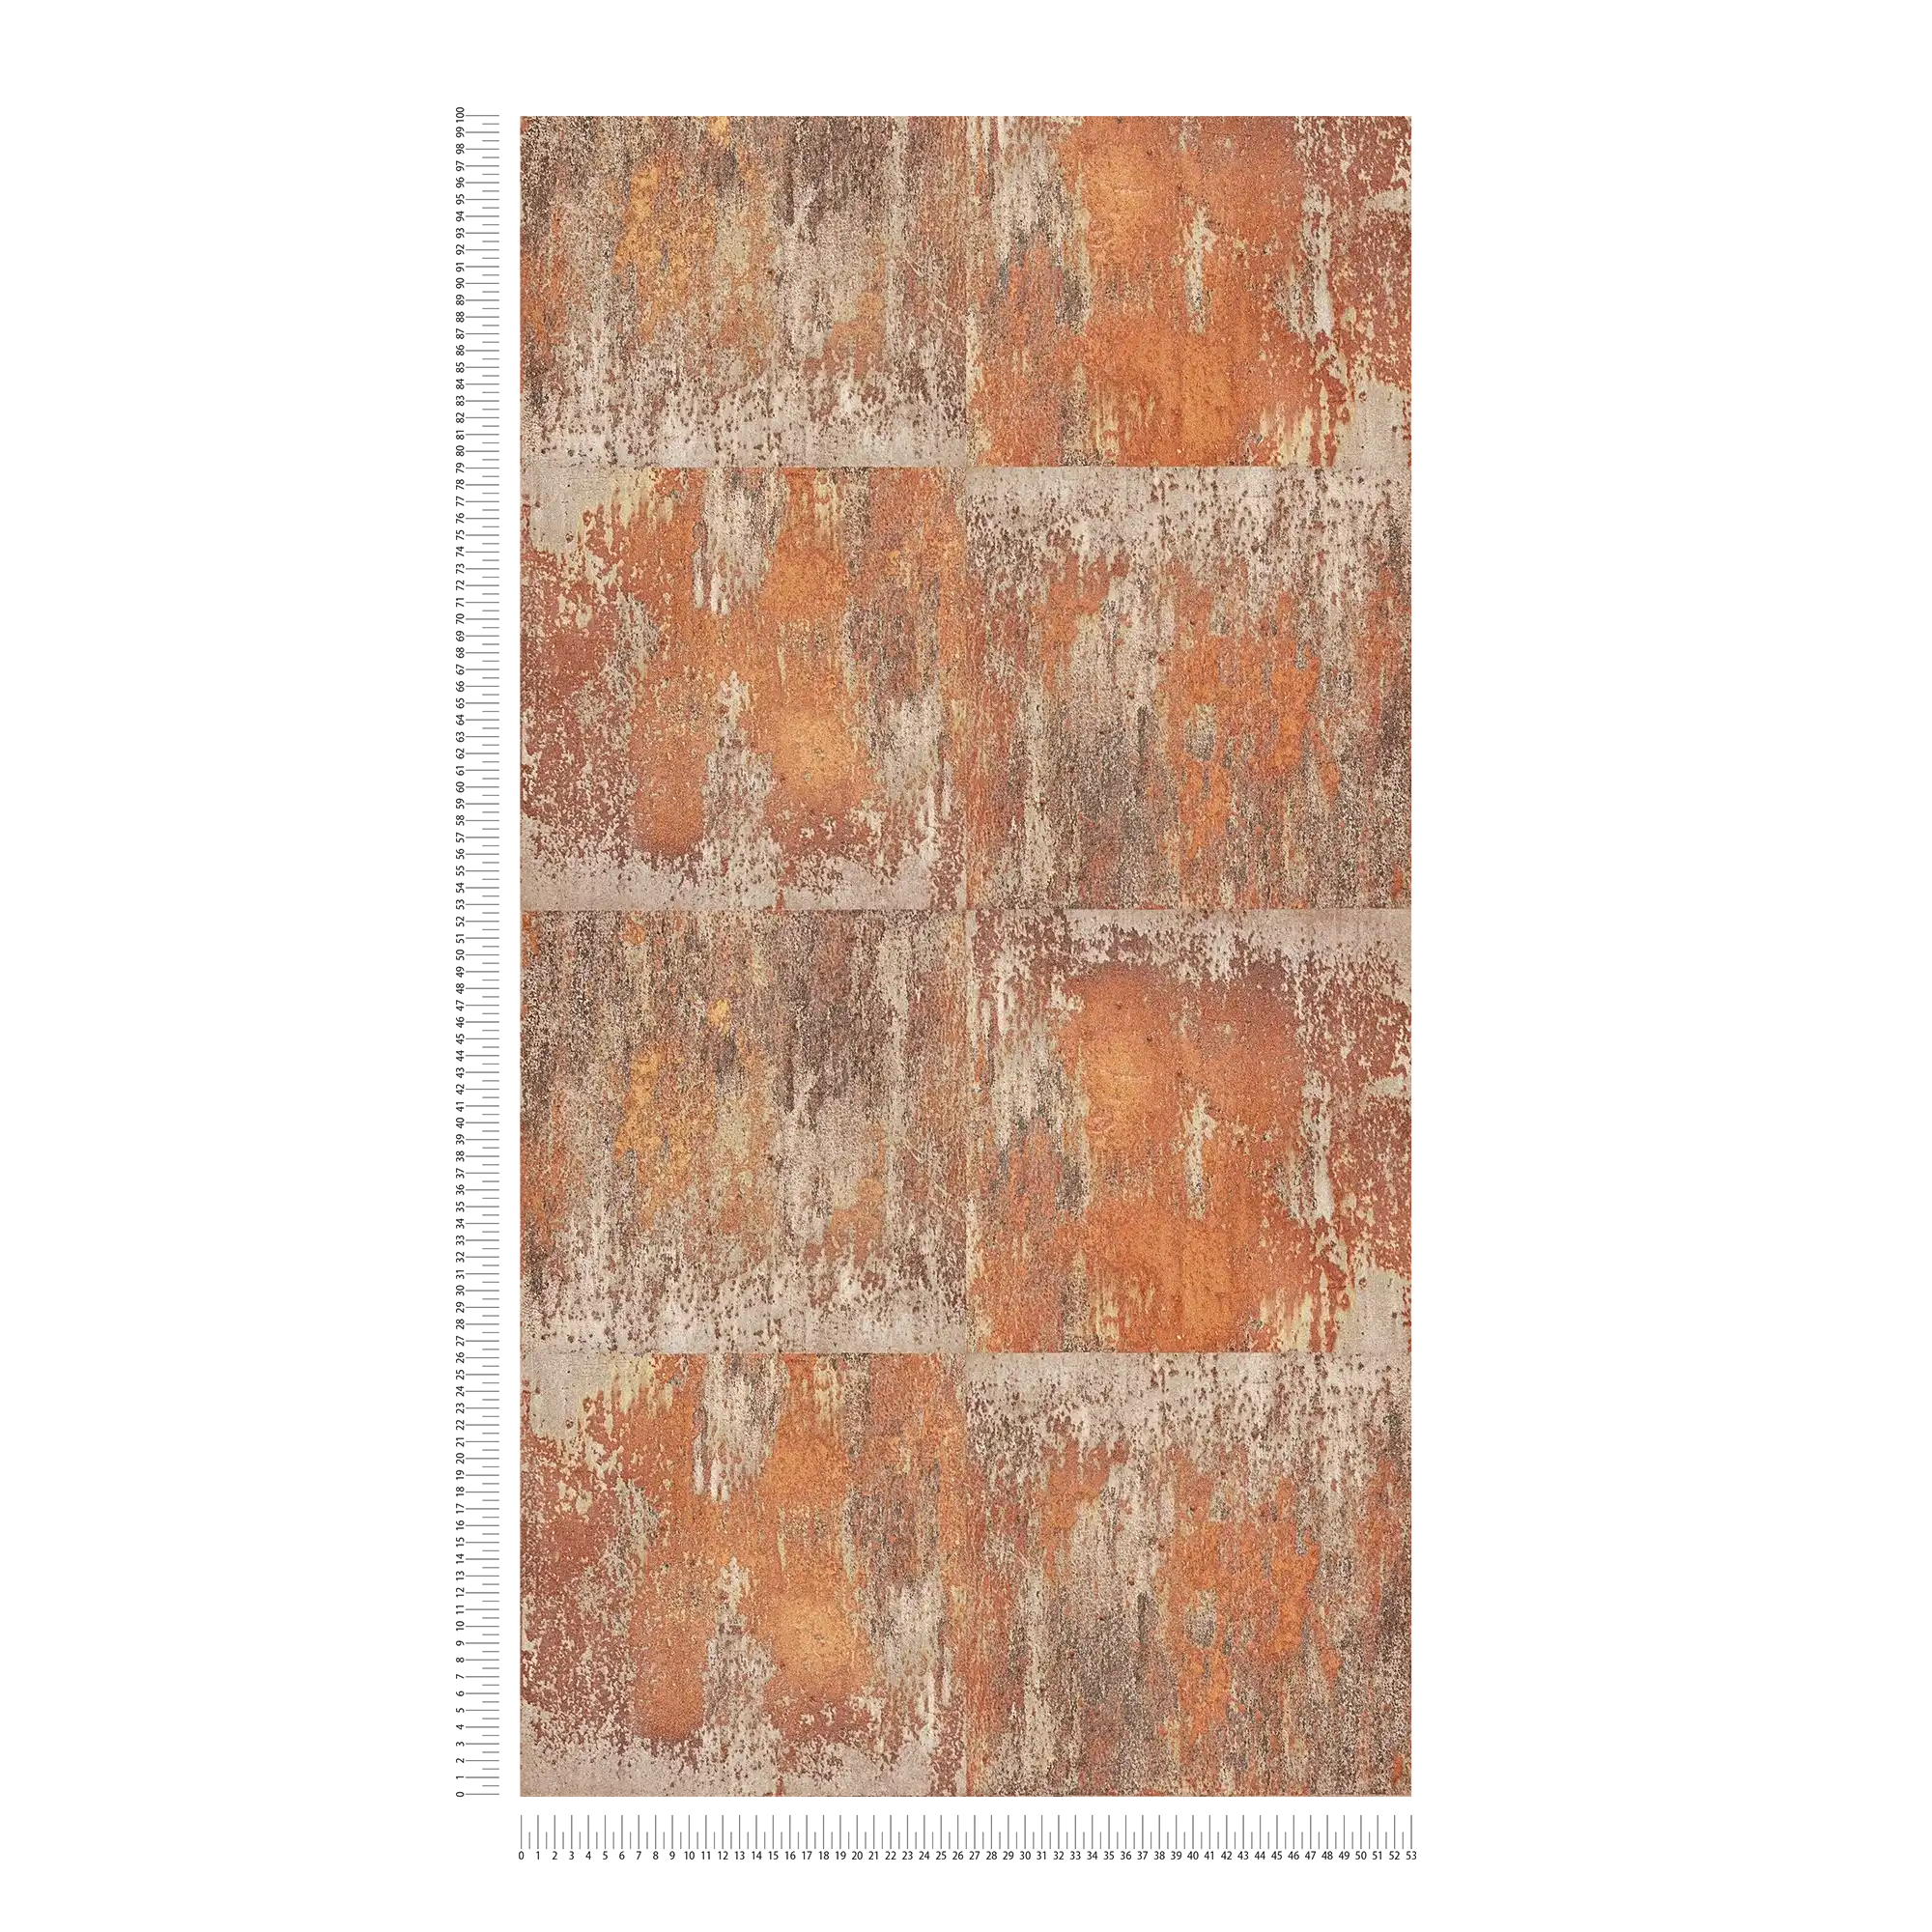             Non-woven wallpaper patina design with rust and copper effects - orange, brown, copper
        